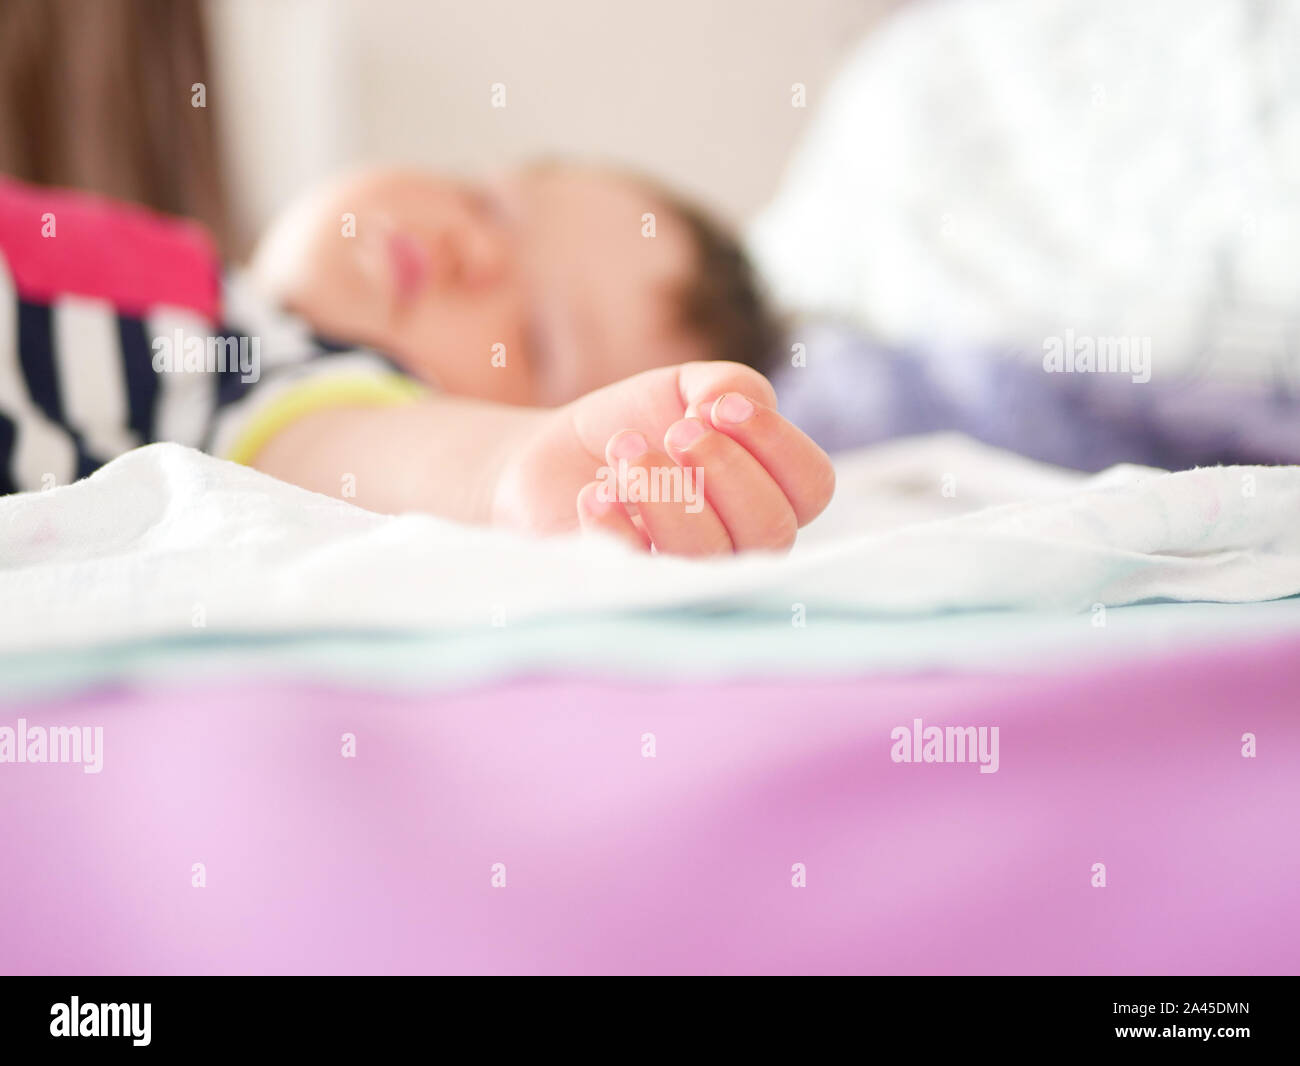 baby sleeps in parents bed. arms outstretched baby's restful sleep. close-up. child 0-1 years old. adorable lovely baby sleeps calmly in bed, has a Stock Photo